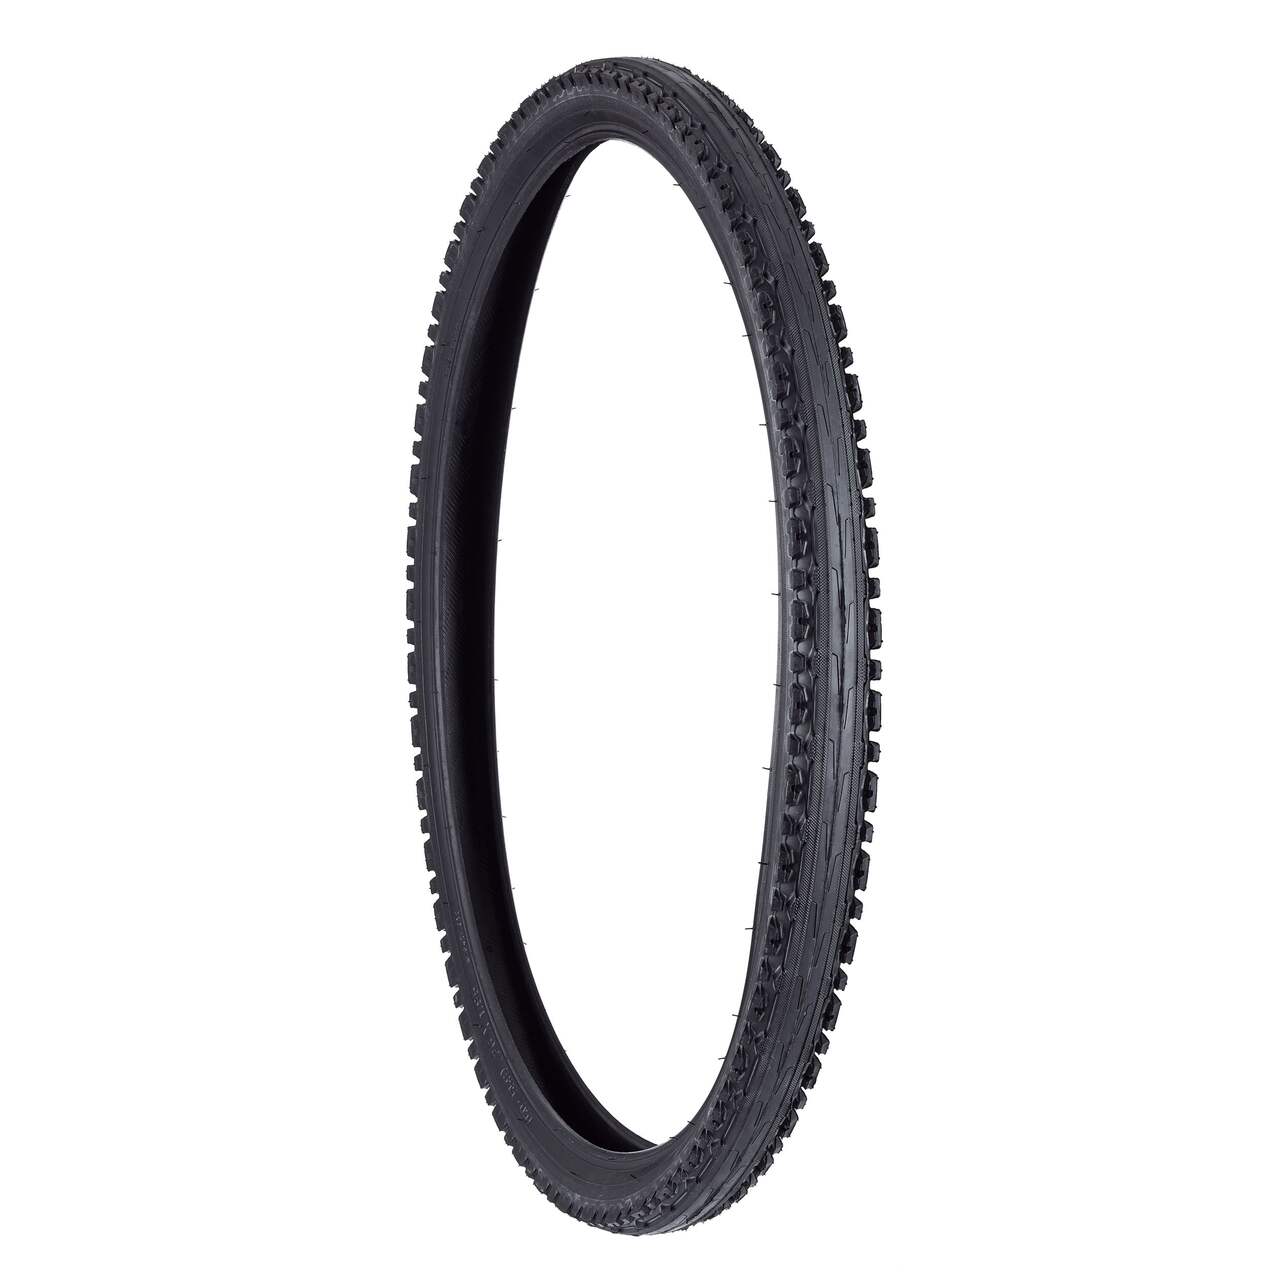 https://media-www.canadiantire.ca/product/playing/cycling/bicycle-accessories/0737278/kenda-k847-26-x1-95-comfort-bike-tire--27338539-22cc-45d3-bf29-1c845ba7e331-jpgrendition.jpg?imdensity=1&imwidth=640&impolicy=mZoom